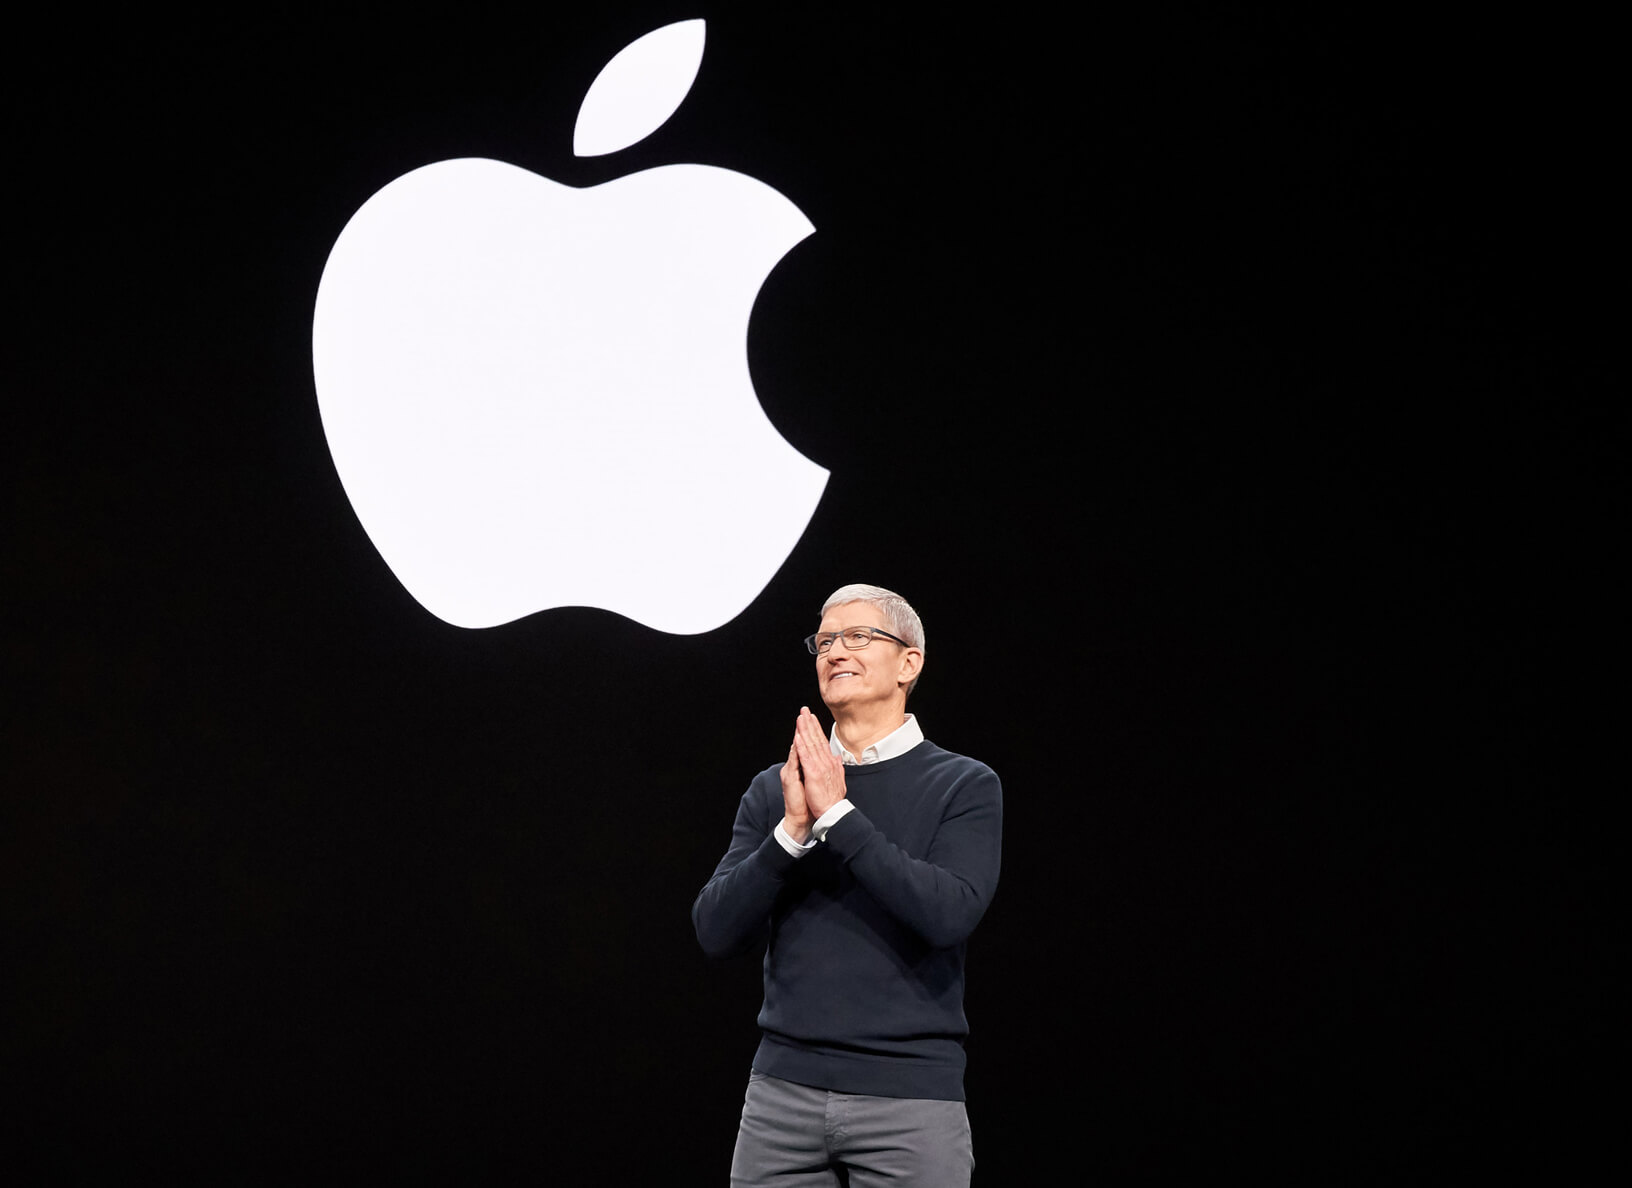 Apple wants employees back in the office for three days per week by September